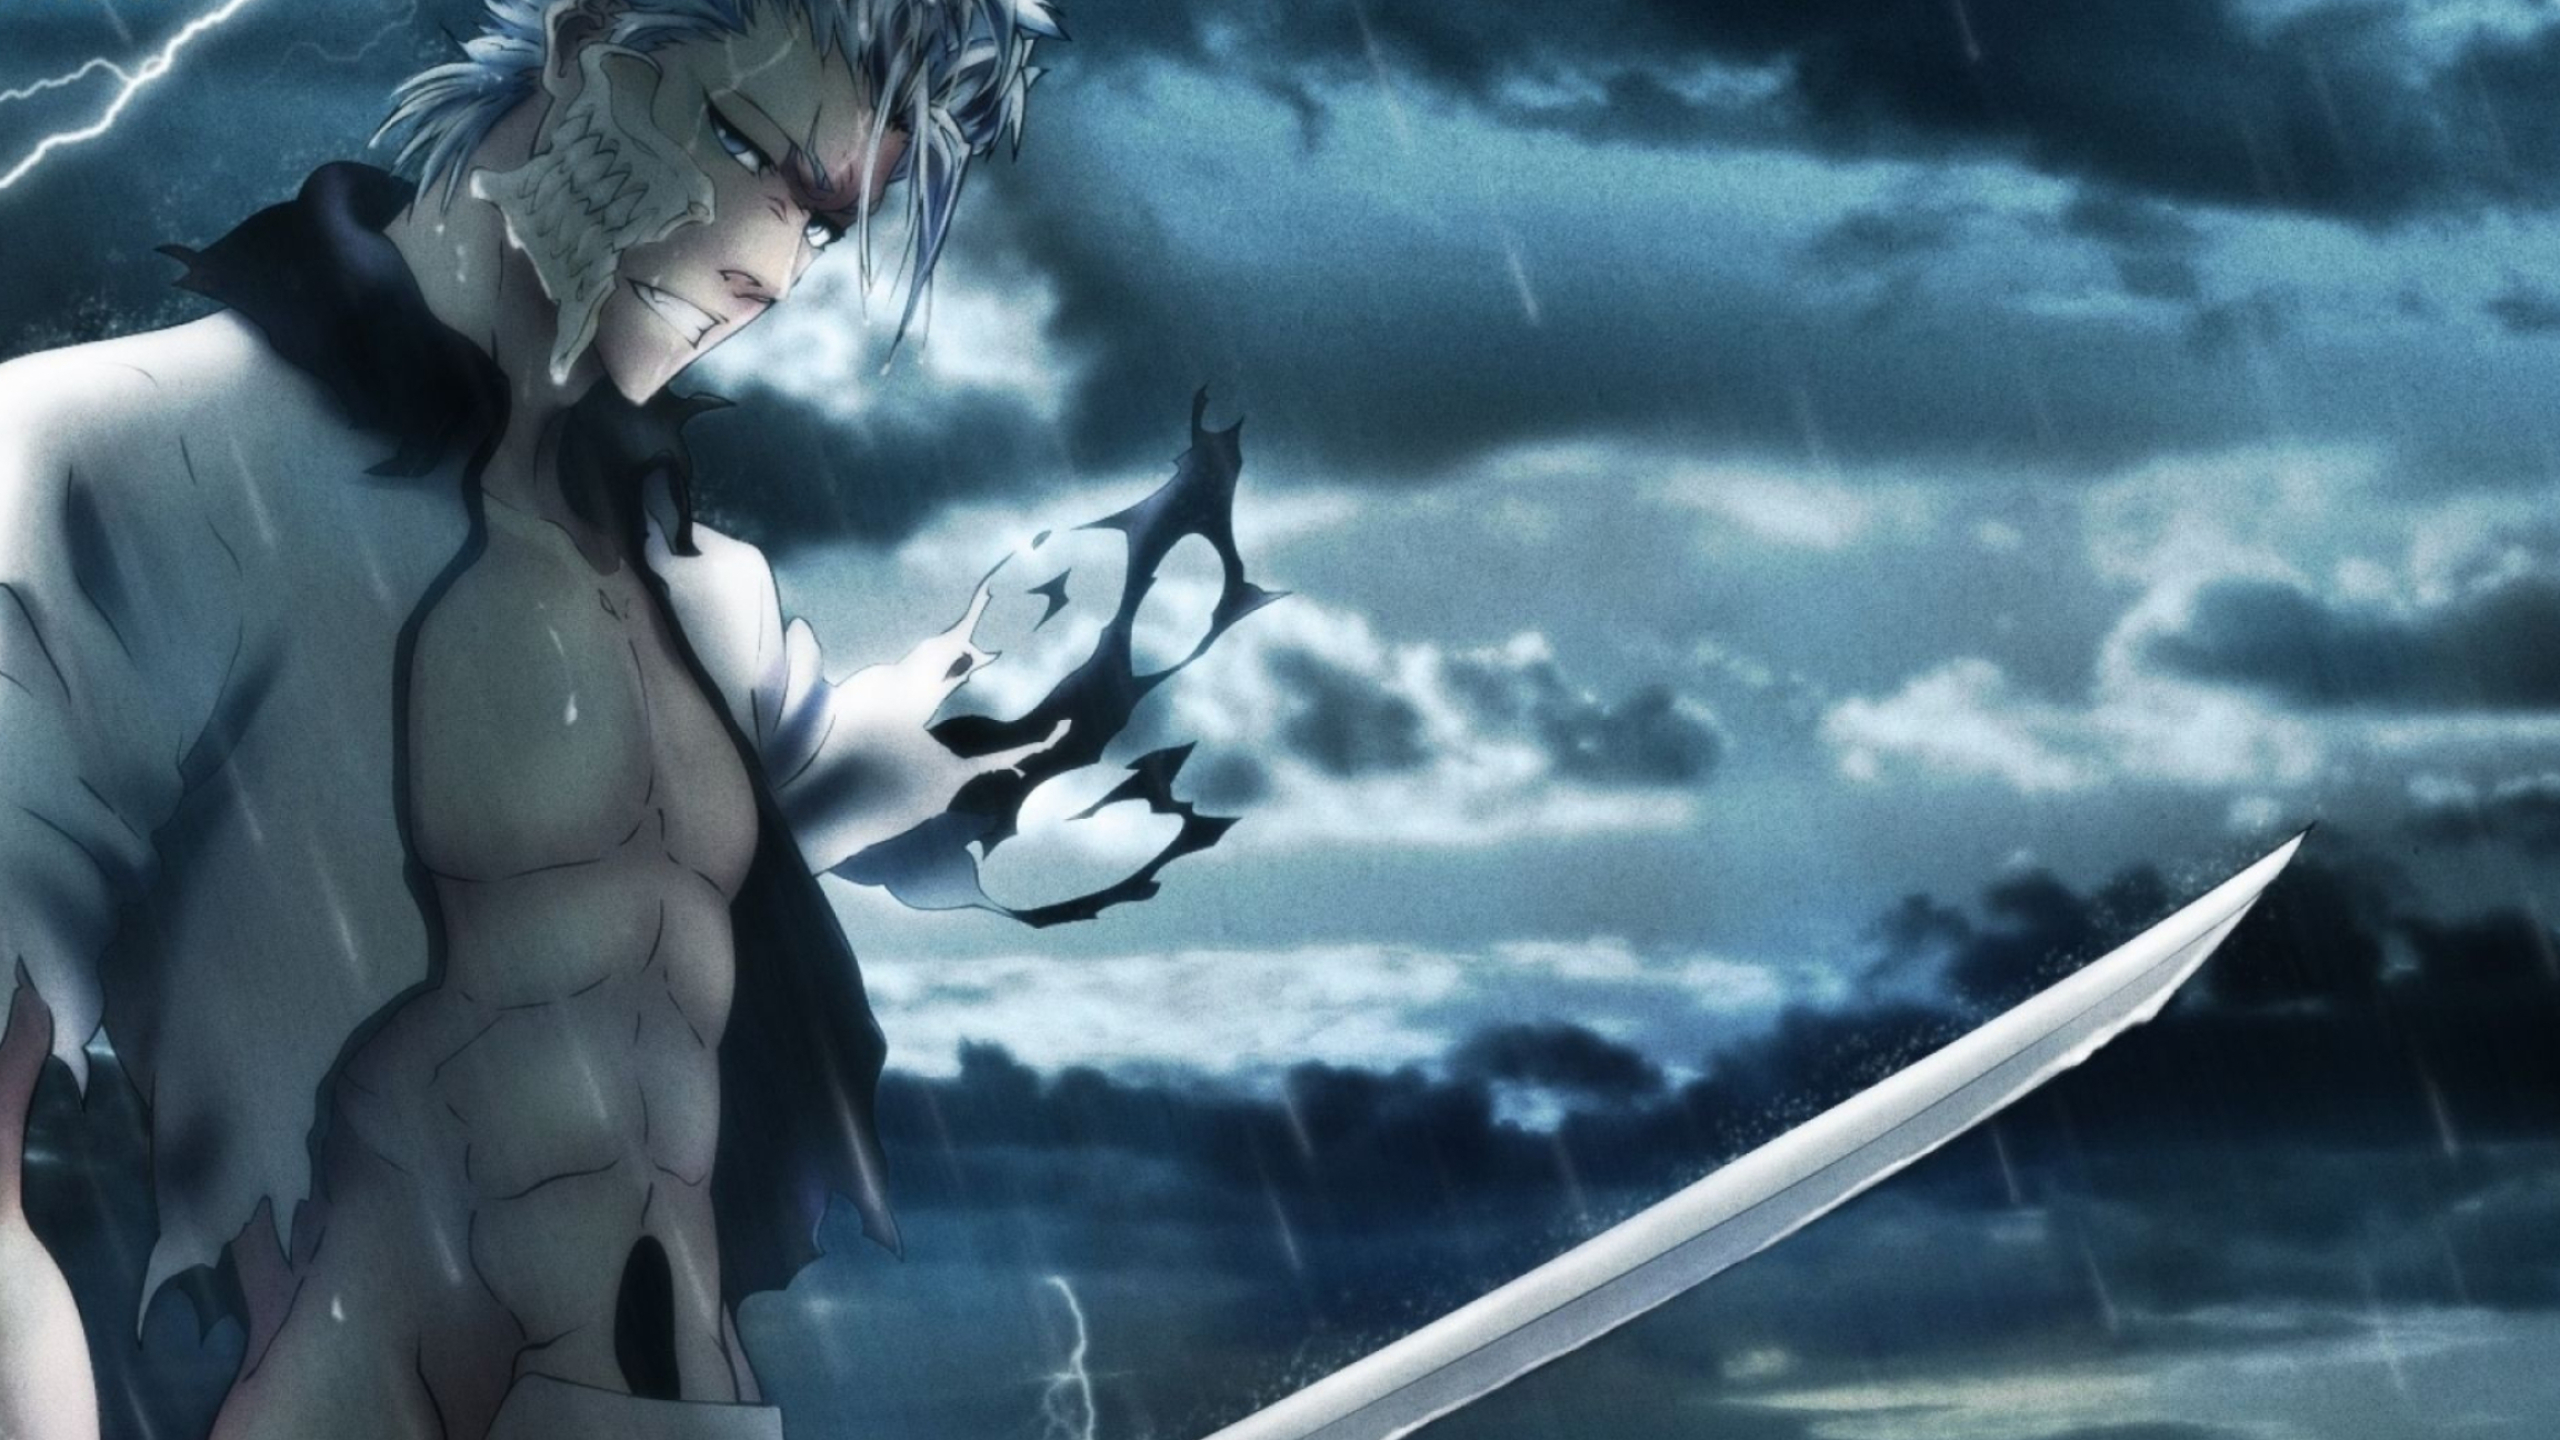 Grimmjow Jaggerjack: An antagonist with a very brutal, merciless, temperamental, and bloodthirsty personality. 2560x1440 HD Wallpaper.